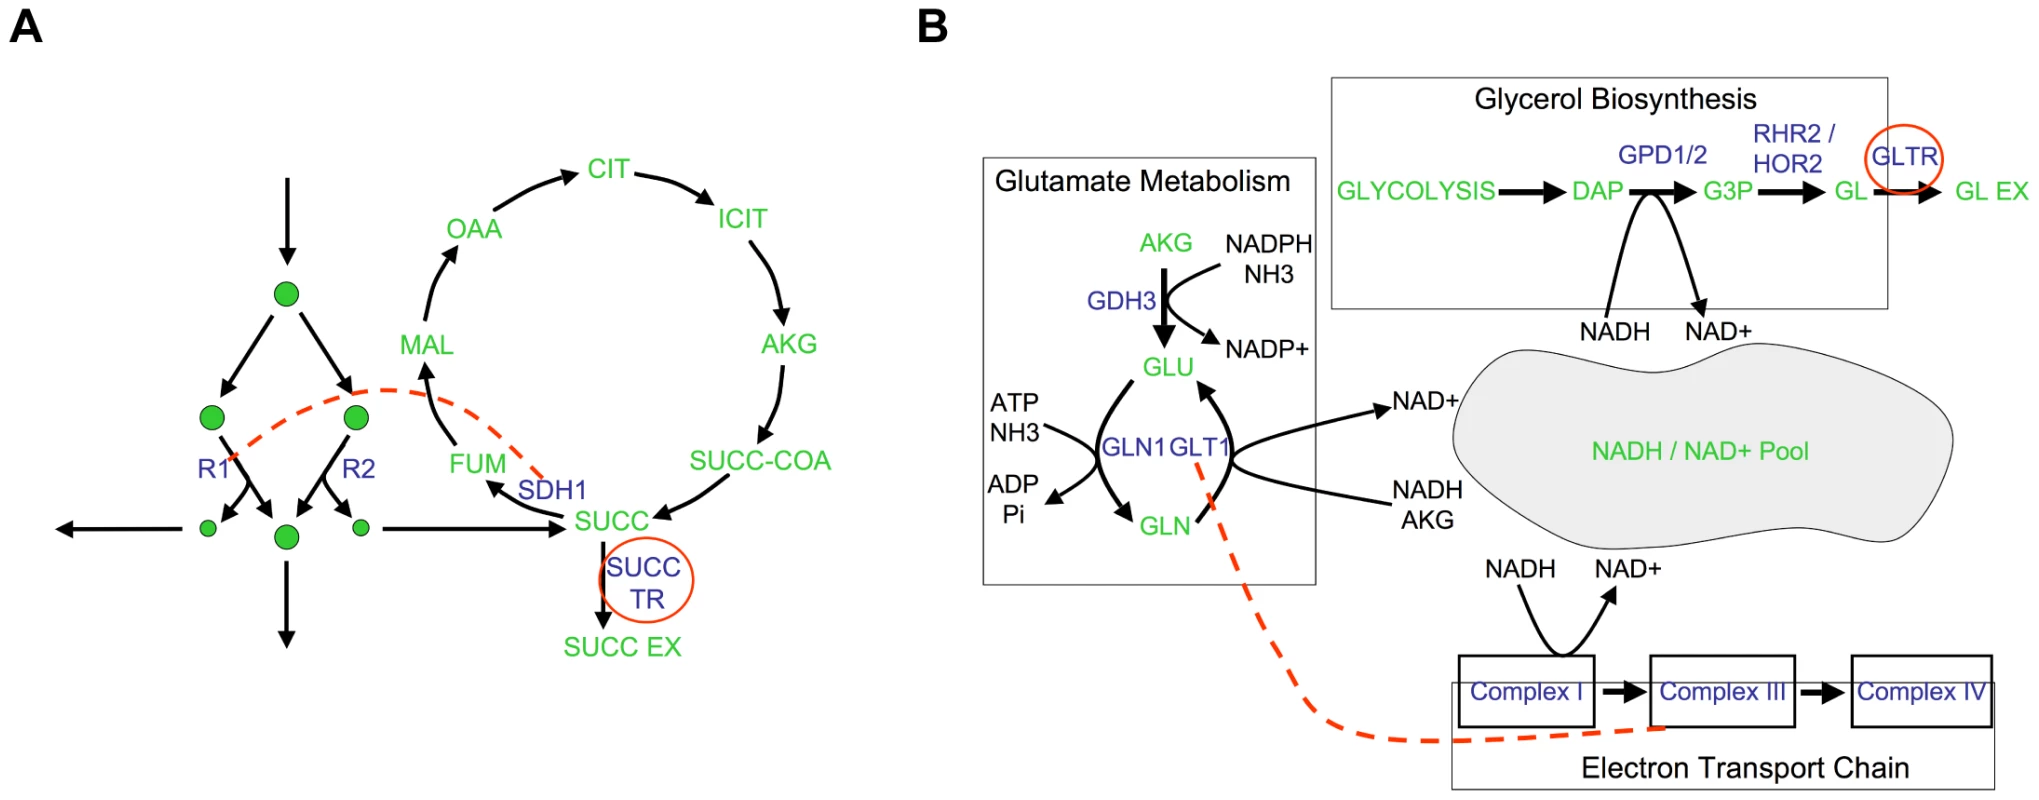 Examples of epistatic interactions (red dashed lines) with respect to flux phenotypes (red circles), overlaid on the corresponding metabolic pathways.